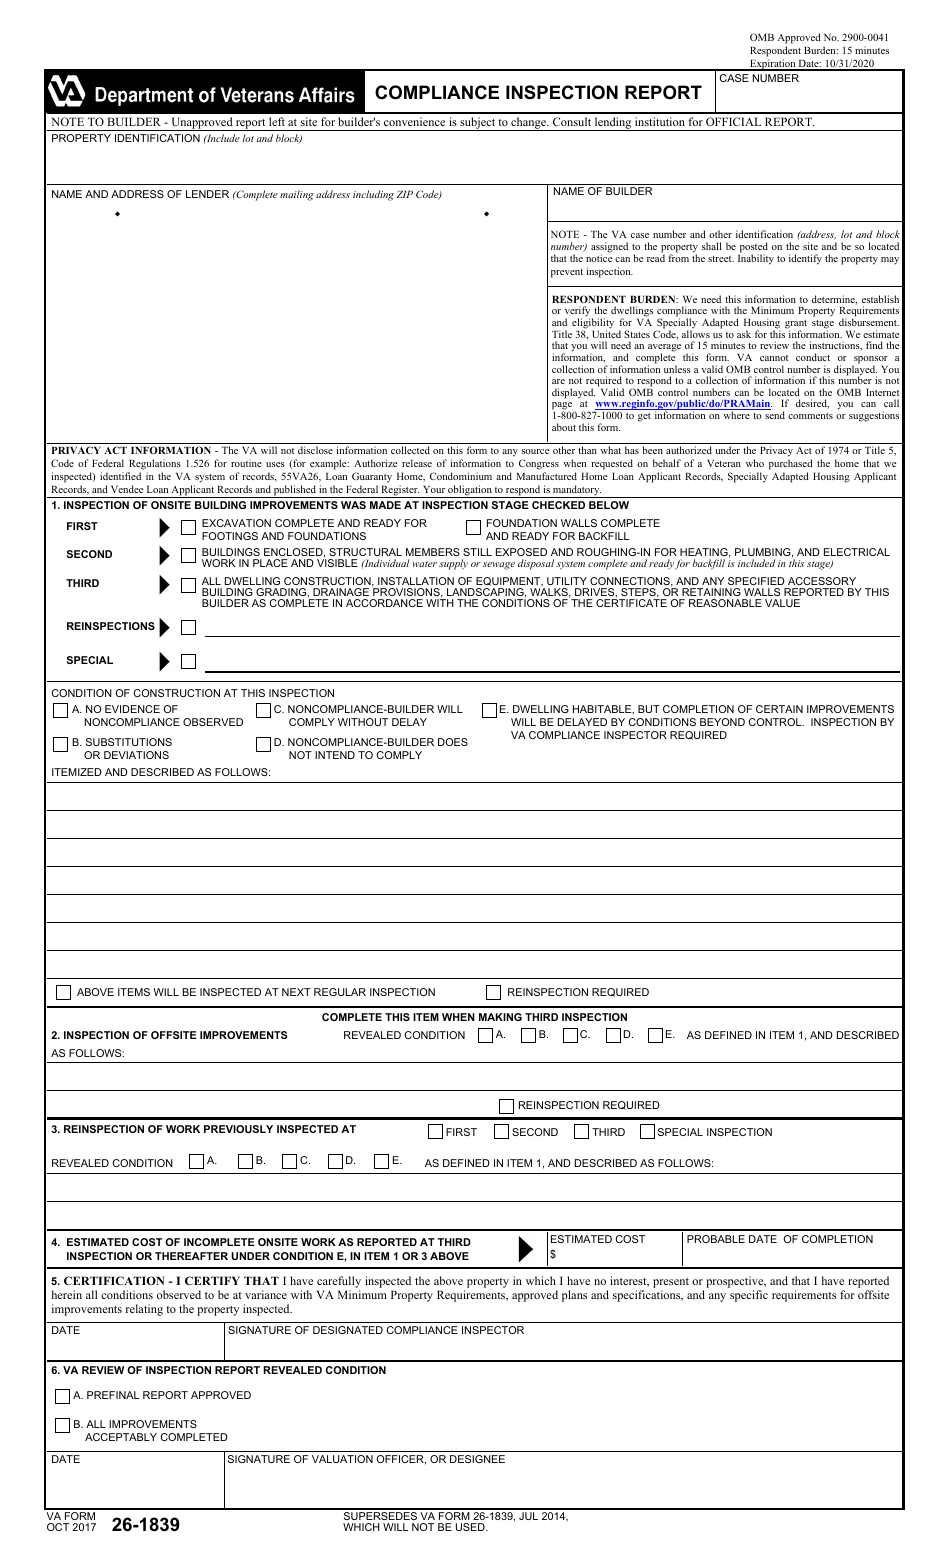 VA Form 26-1839 Compliance Inspection Report, Page 1